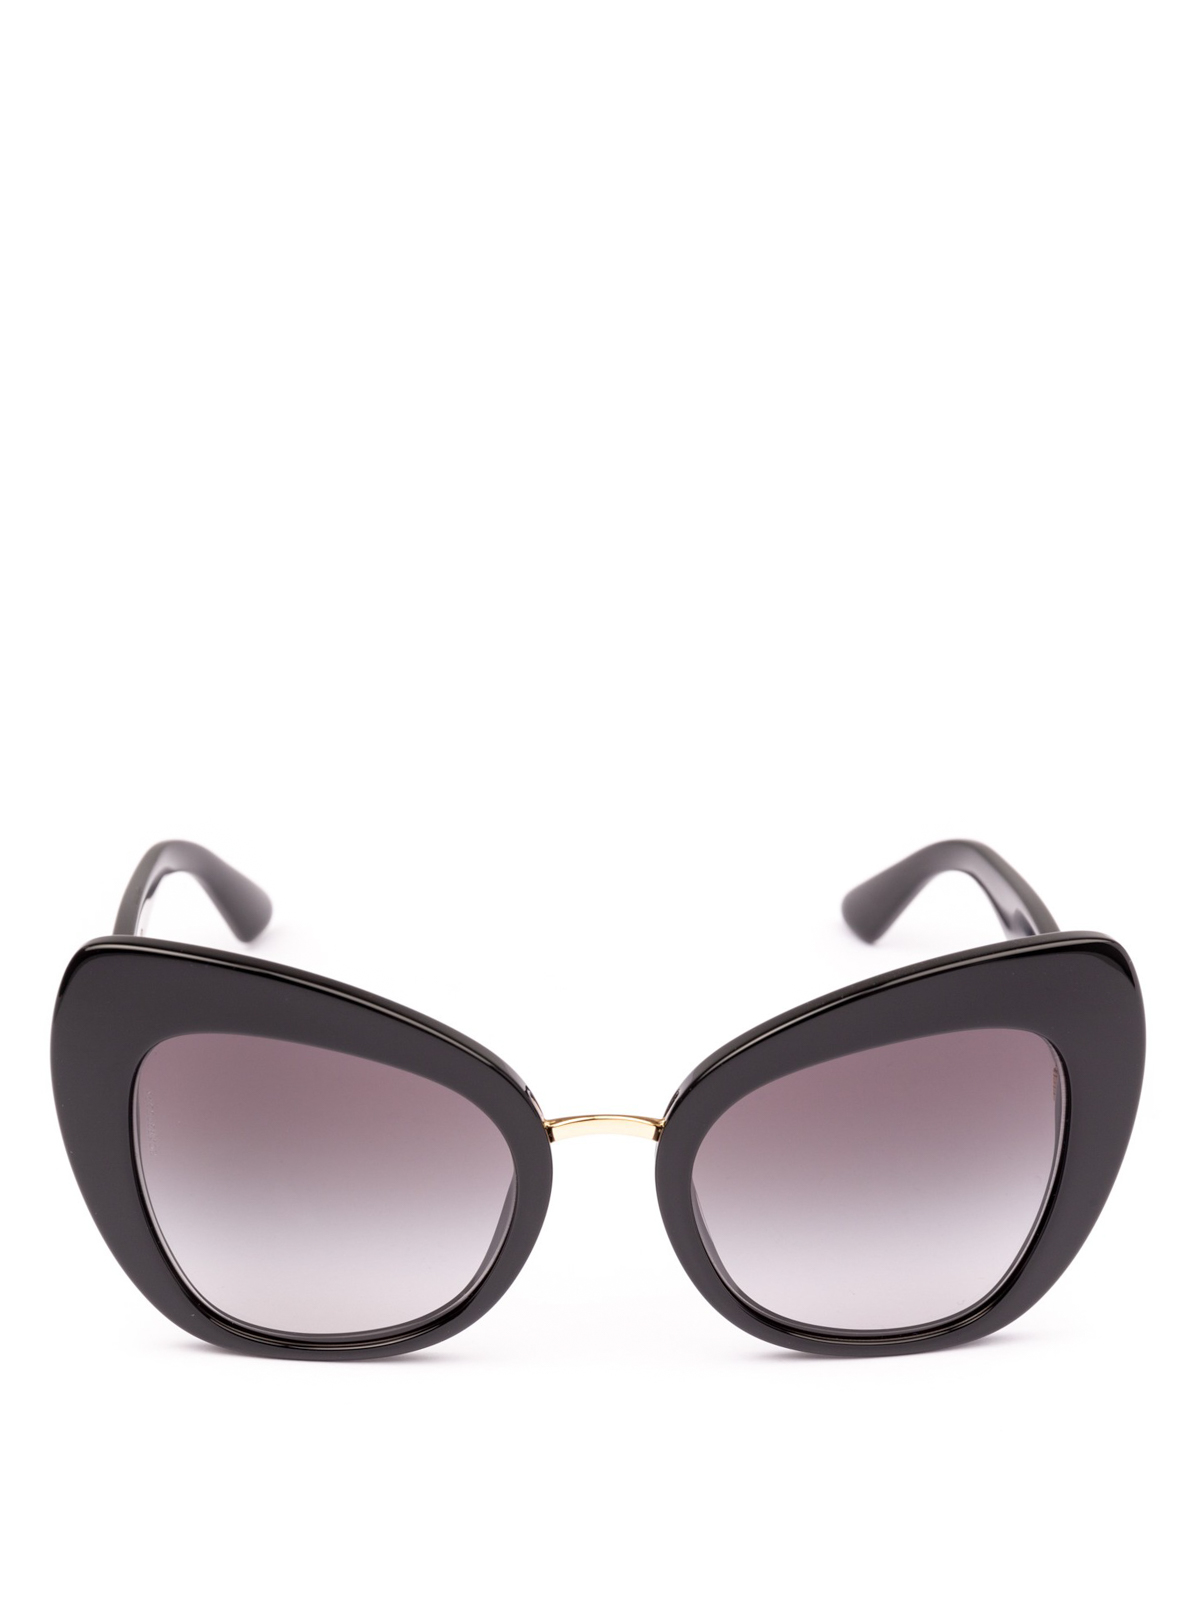 dolce and gabbana butterfly sunglasses